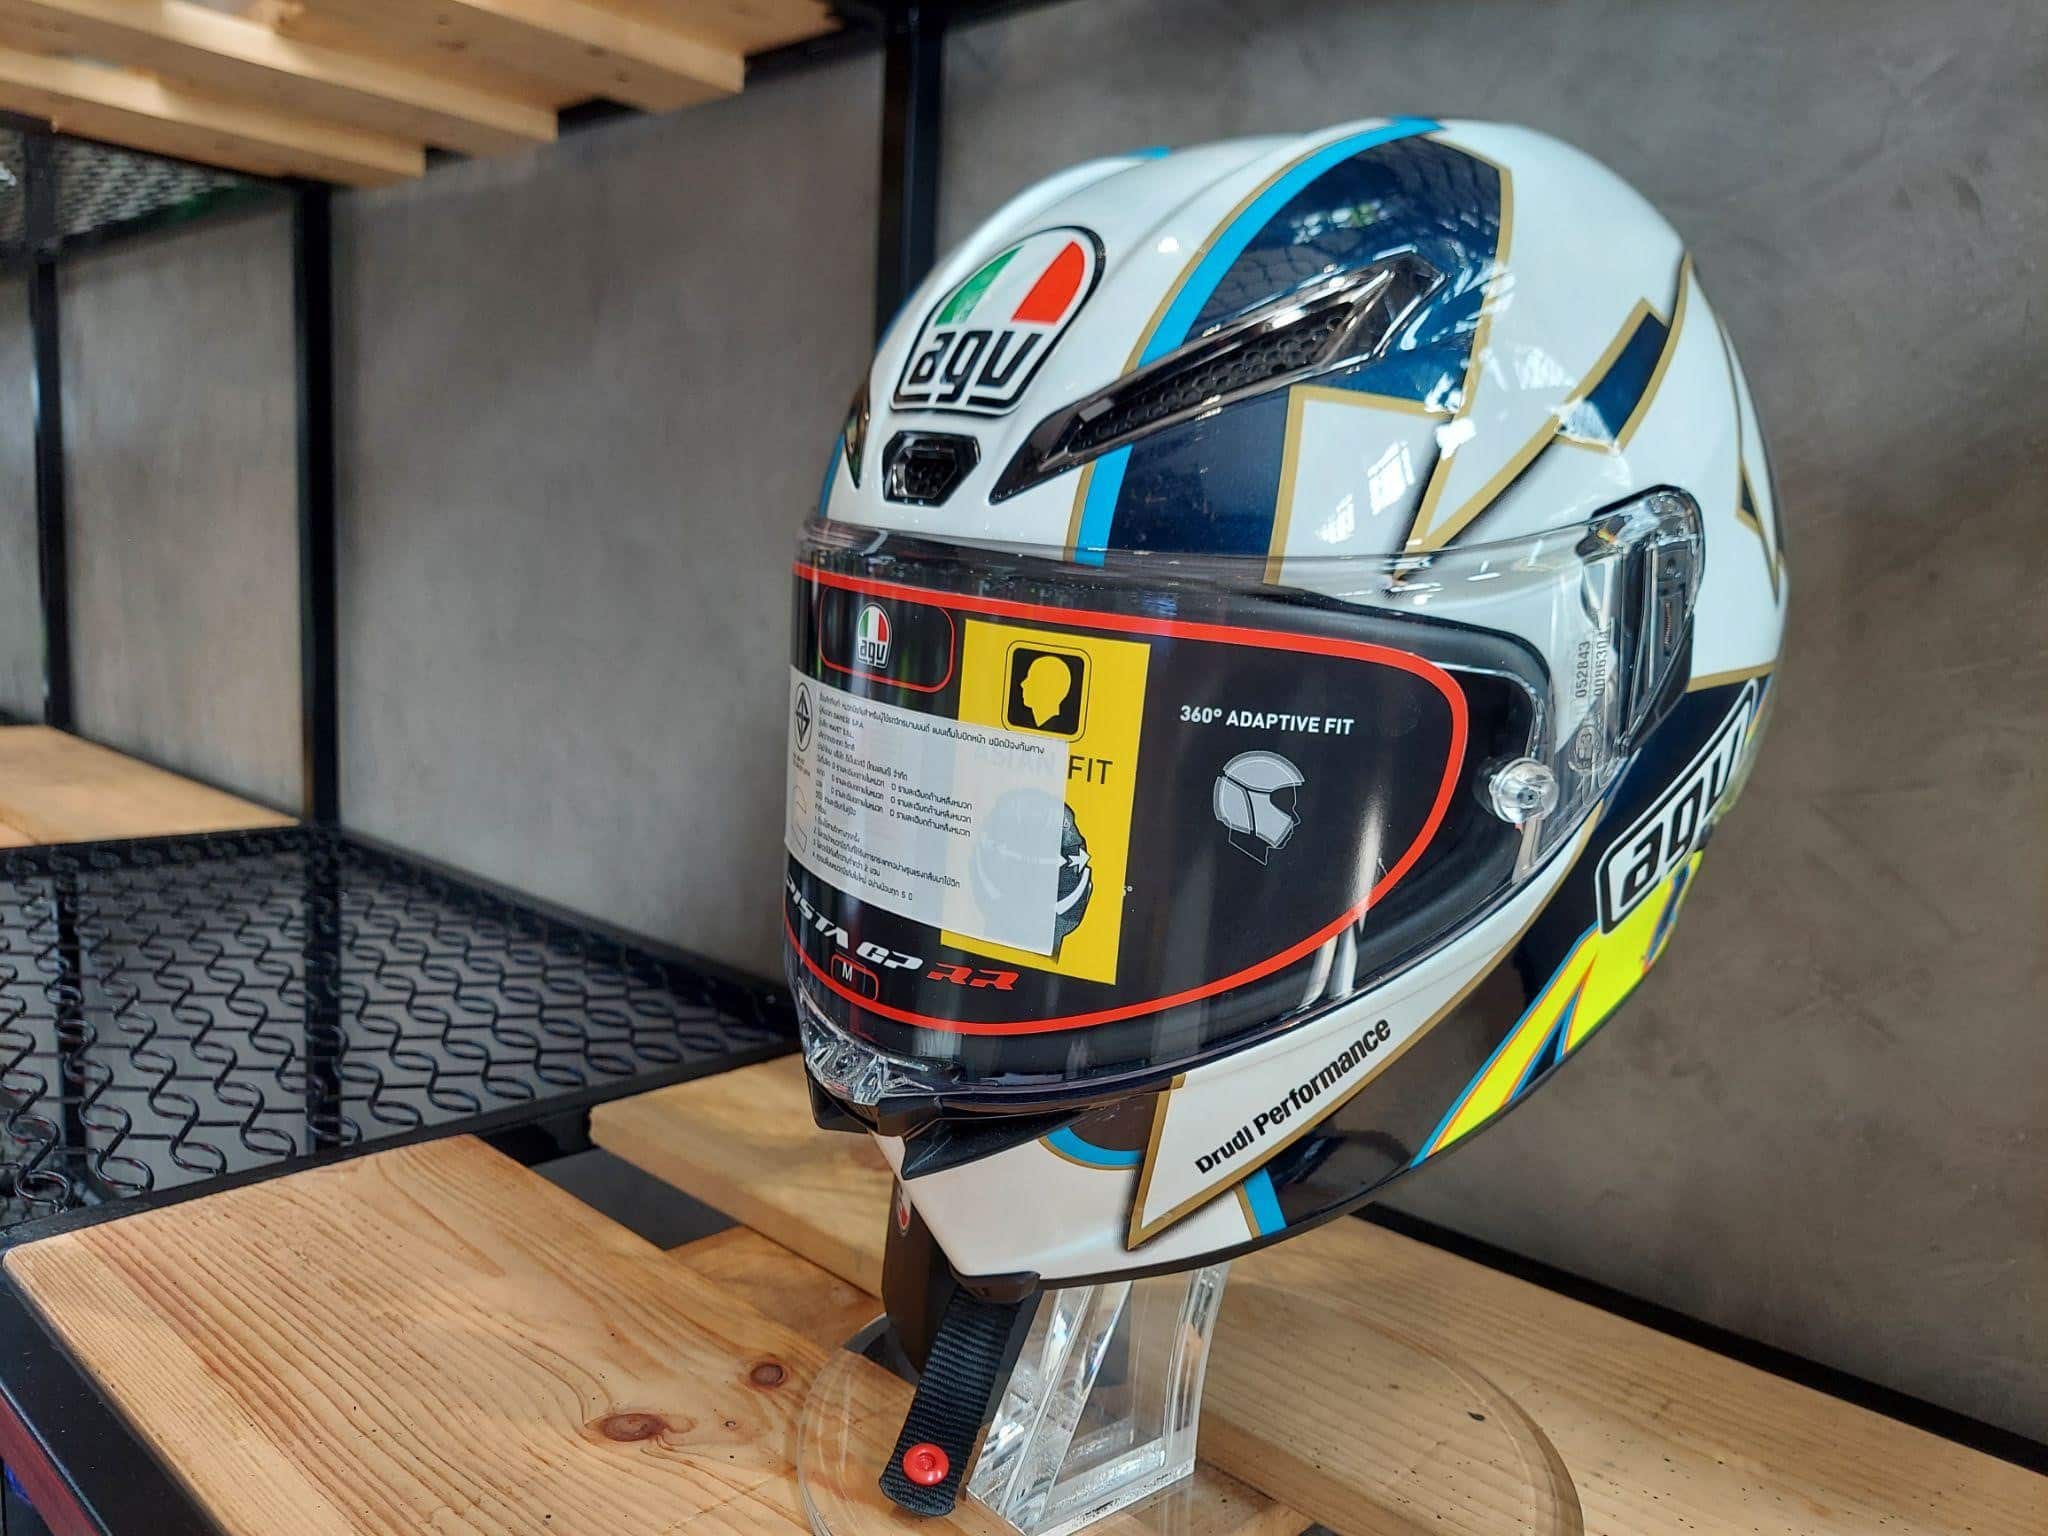 On display is the new AGV K1 helmet, showcasing its aerodynamic shape and ventilation scheme. Notably, it features a spoiler at the back, developed through wind tunnel testing for the Corsa R and Pista GP R models. Photo by Michael Parrotte.